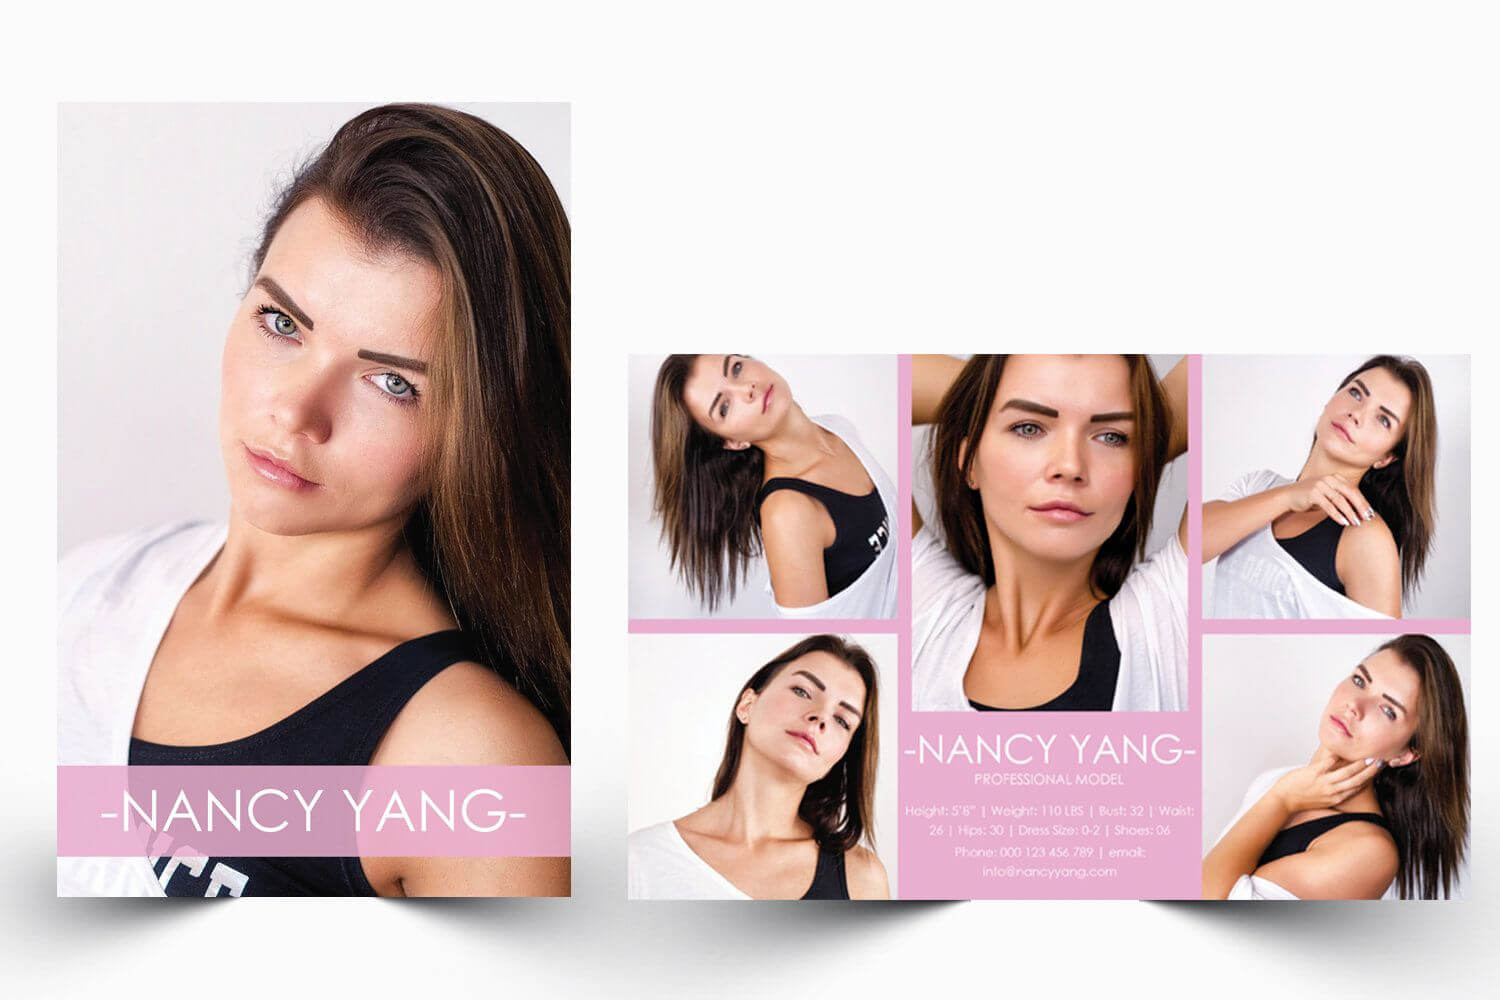 Modeling Comp Card | Model Agency Zed Card | Photoshop & Ms Within Zed Card Template